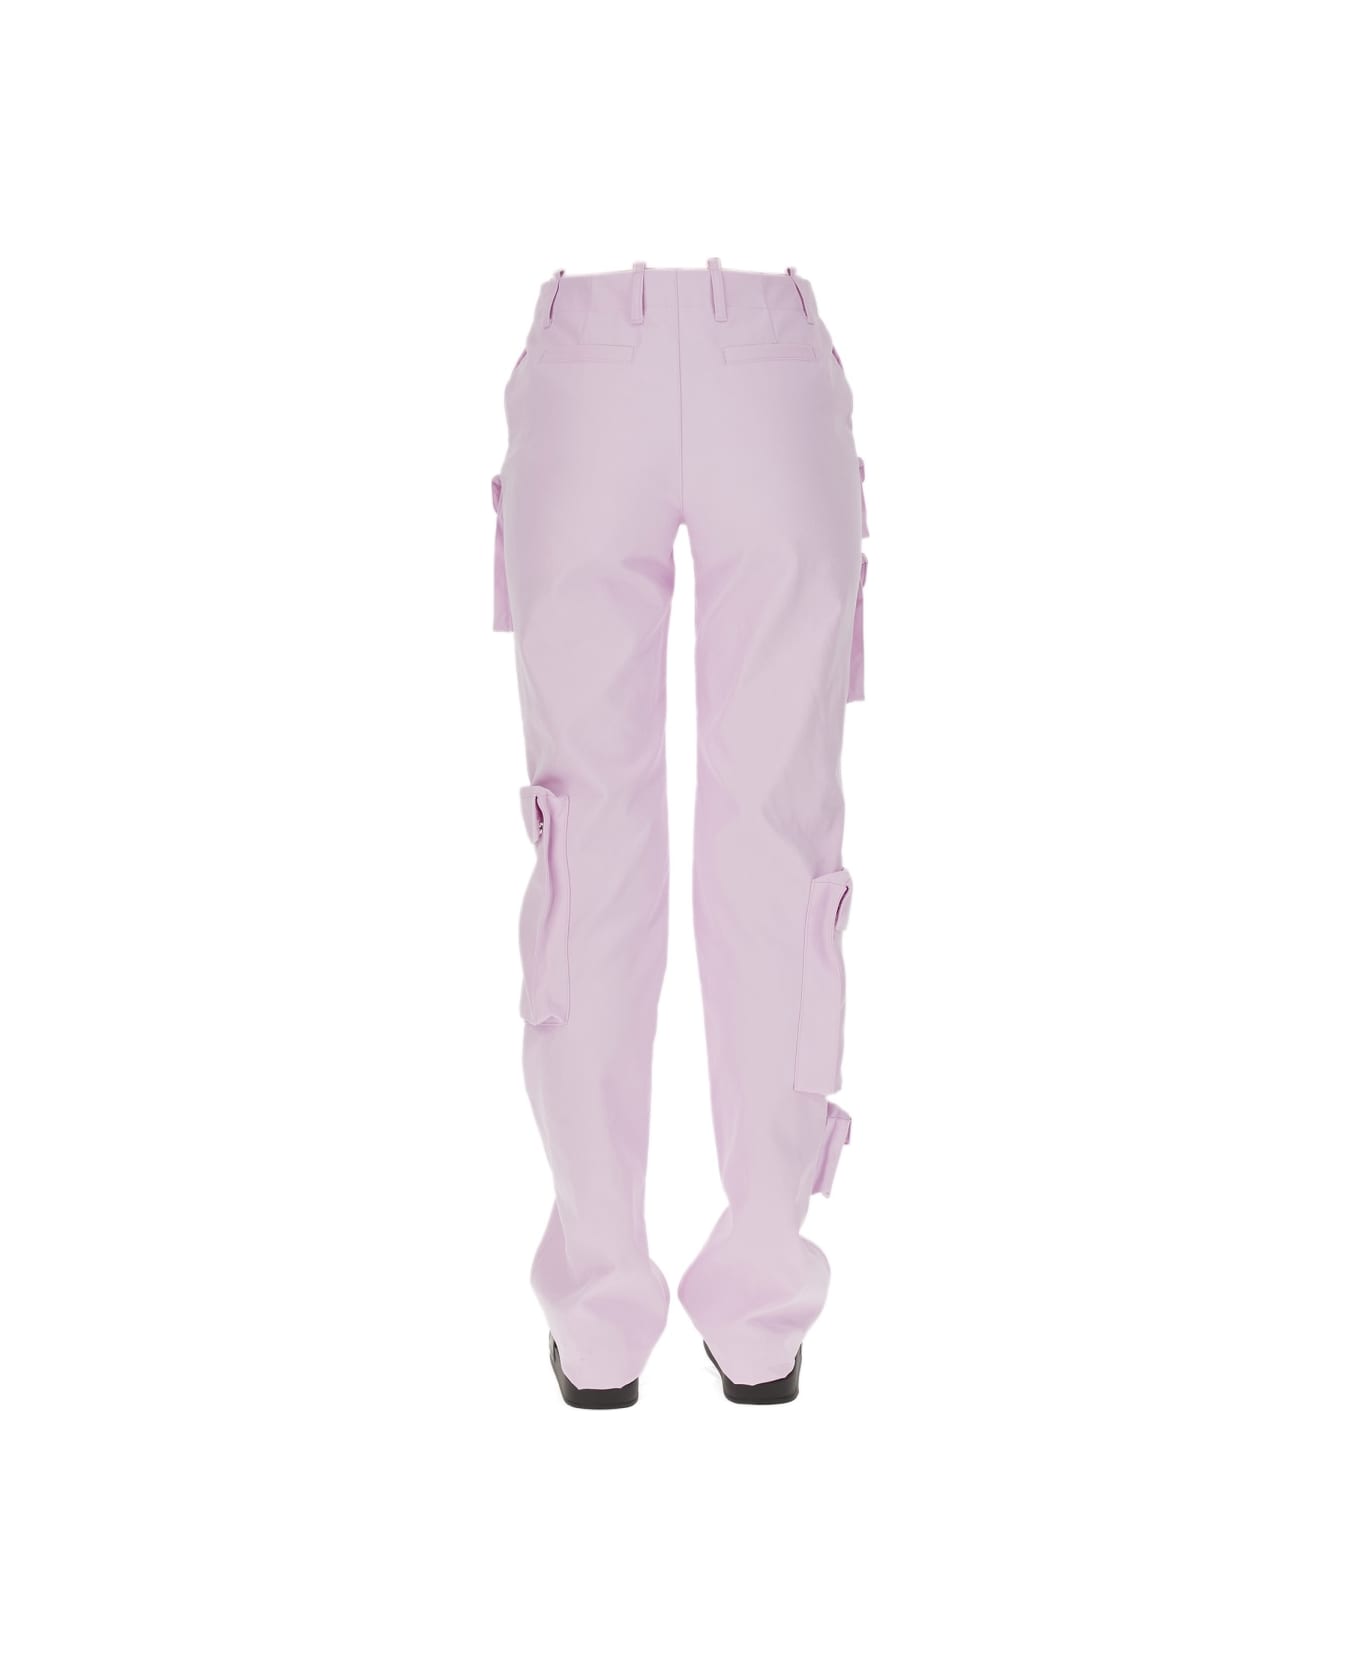 Off-White Cargo Pants - LILAC